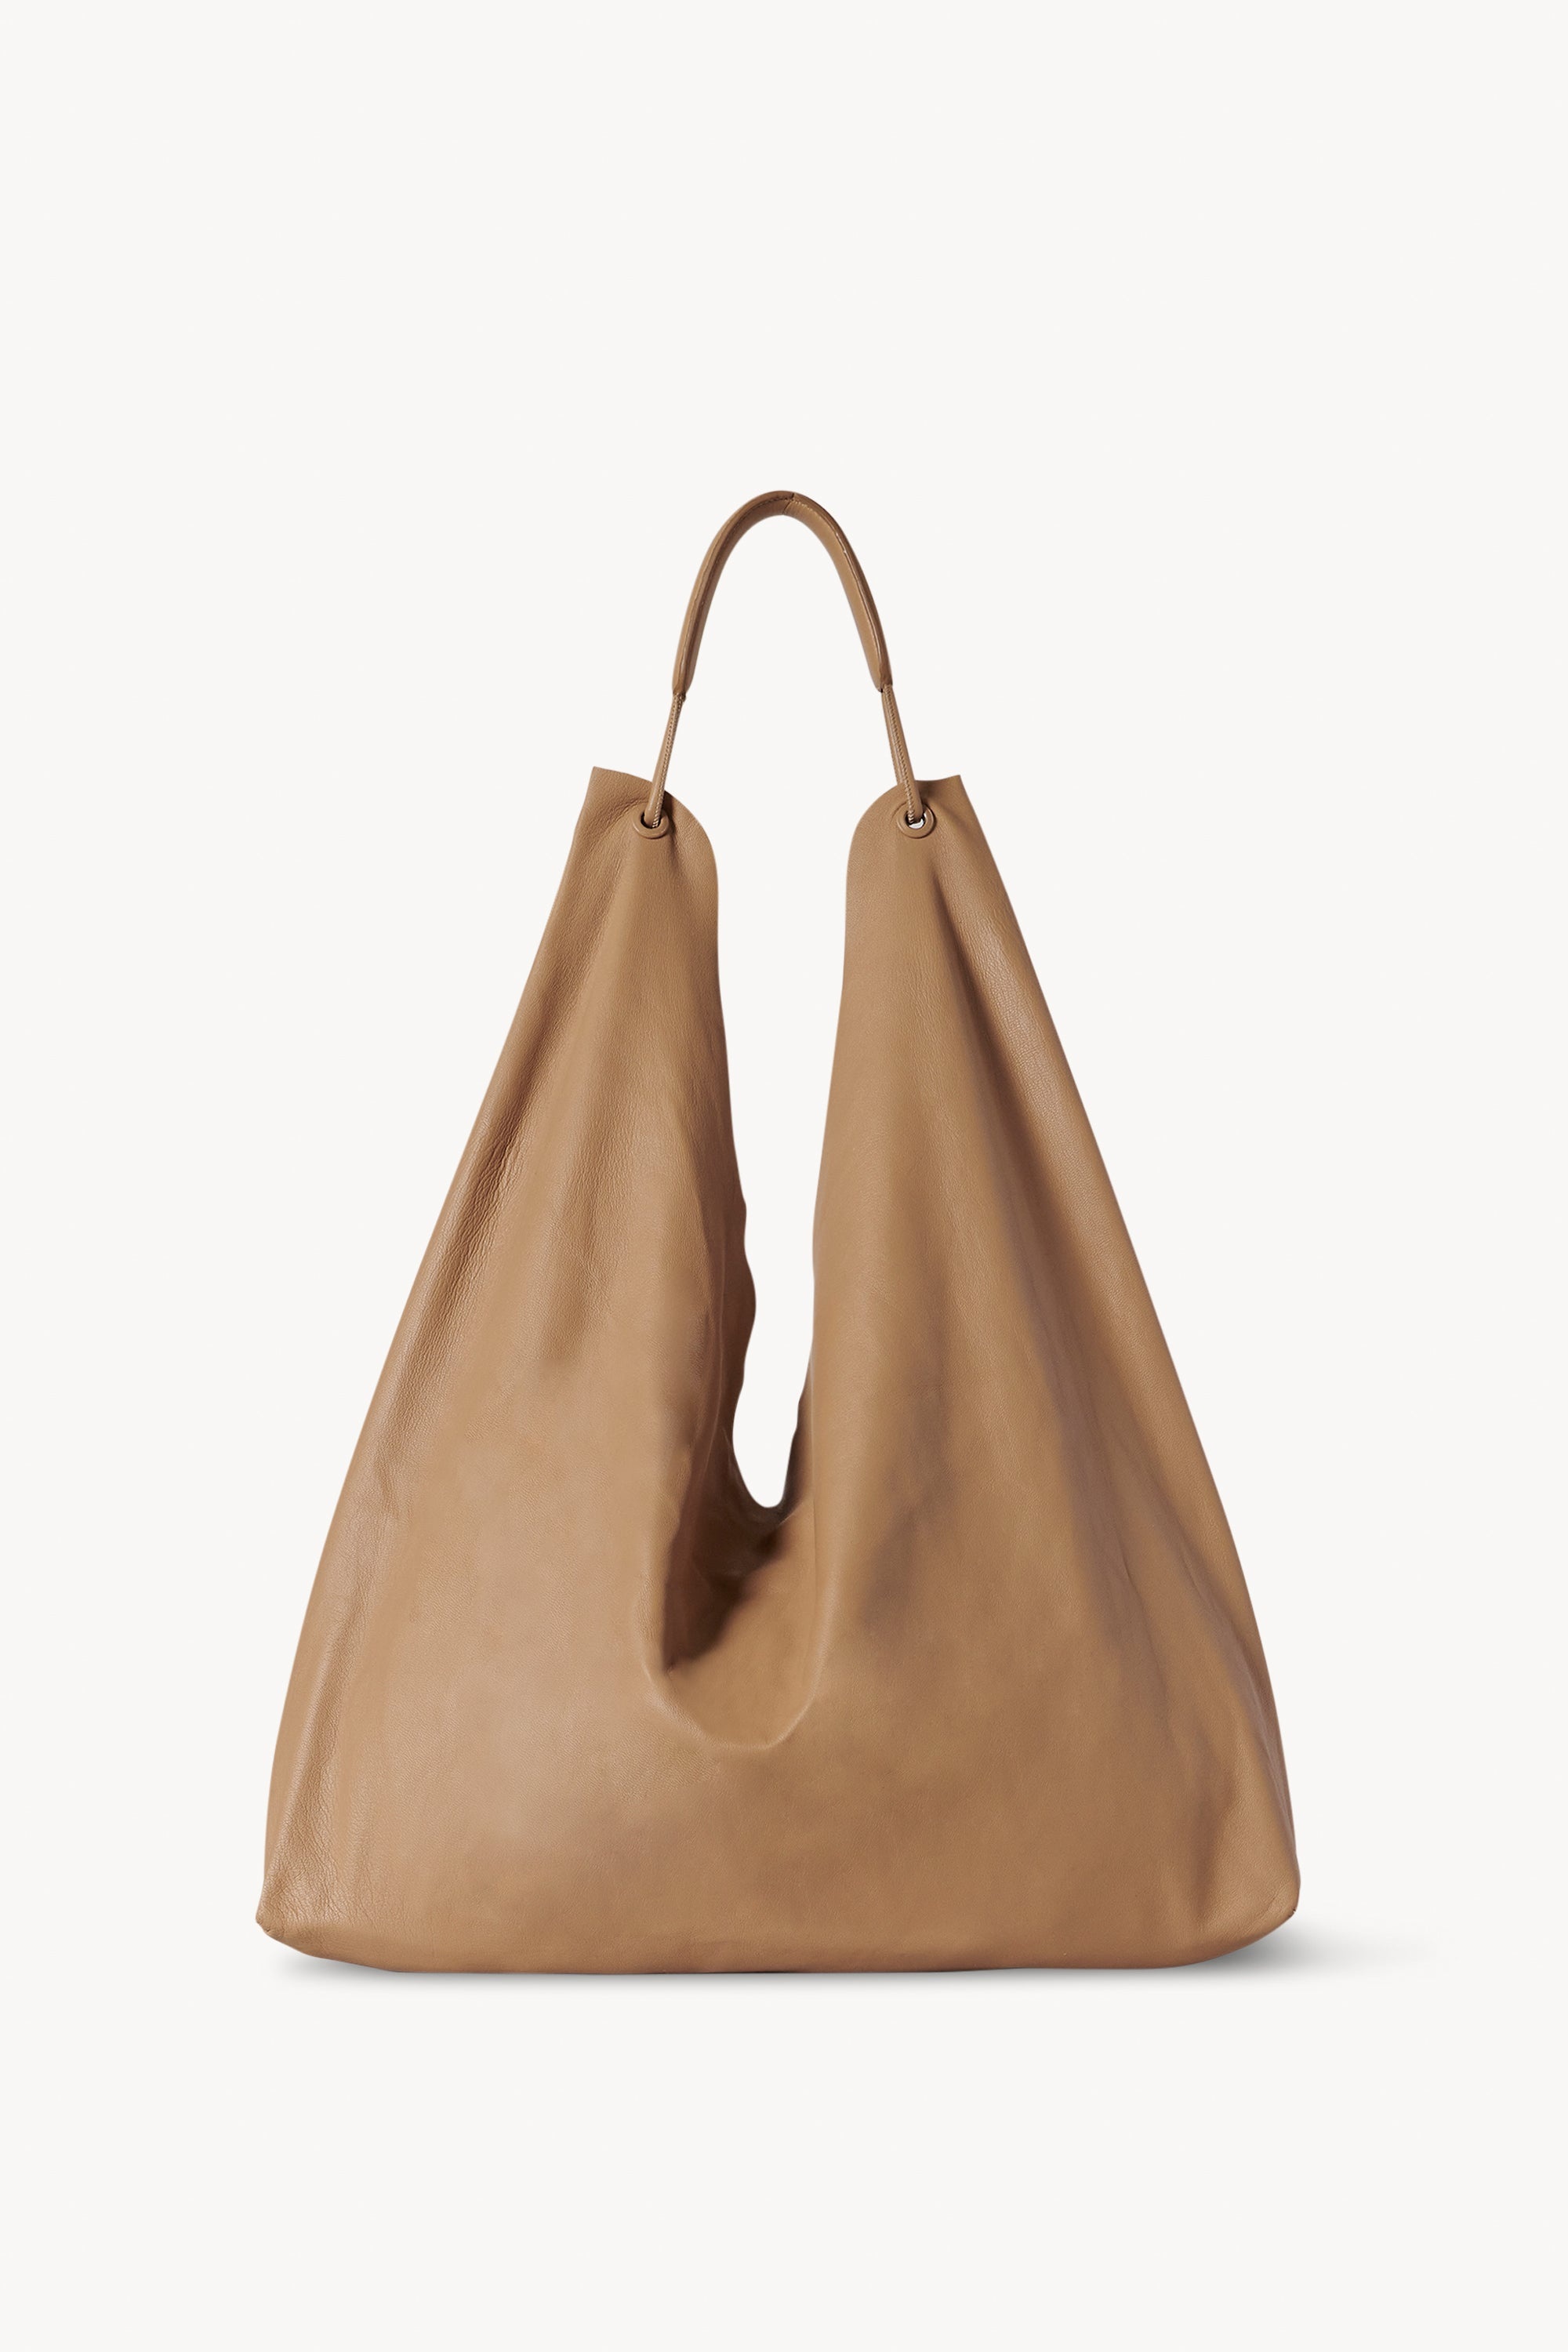 Bindle 3 Bag in Leather - 1